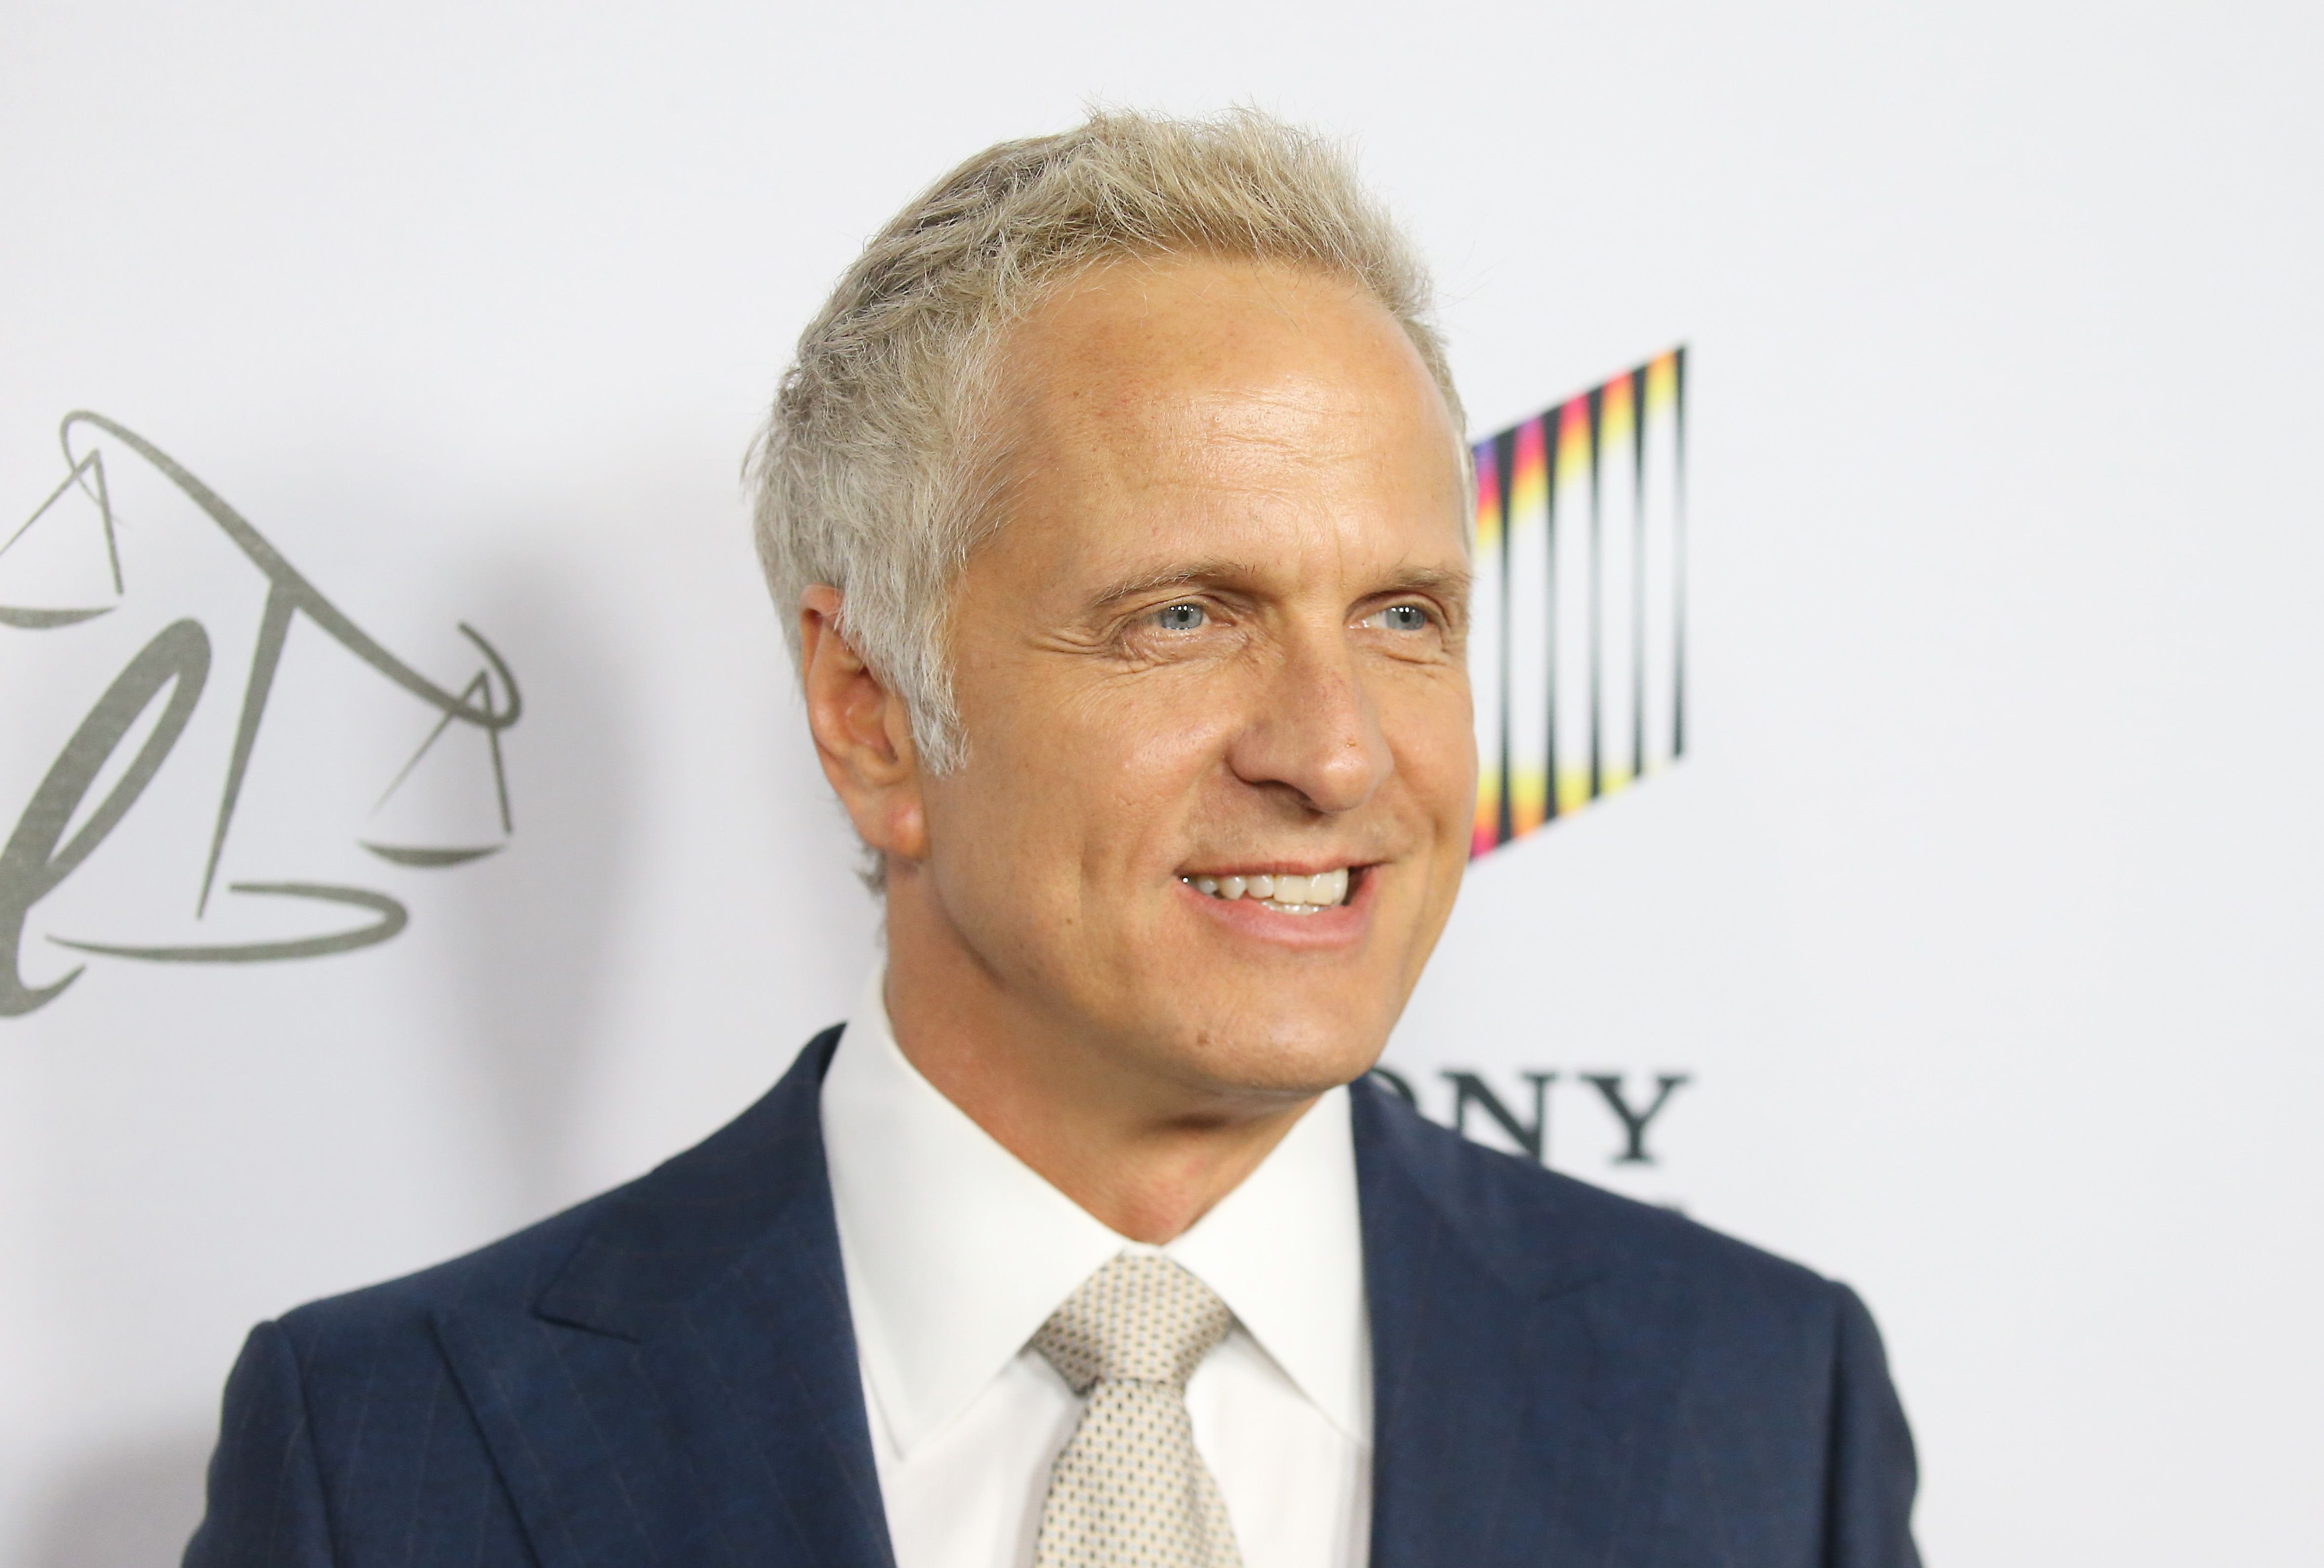 Patrick Fabian during the Los Angeles premiere of AMC's "Better Call Saul" Season 5 held at ArcLight Cinemas on February 05, 2020 in Hollywood, California. | Source: Getty Images